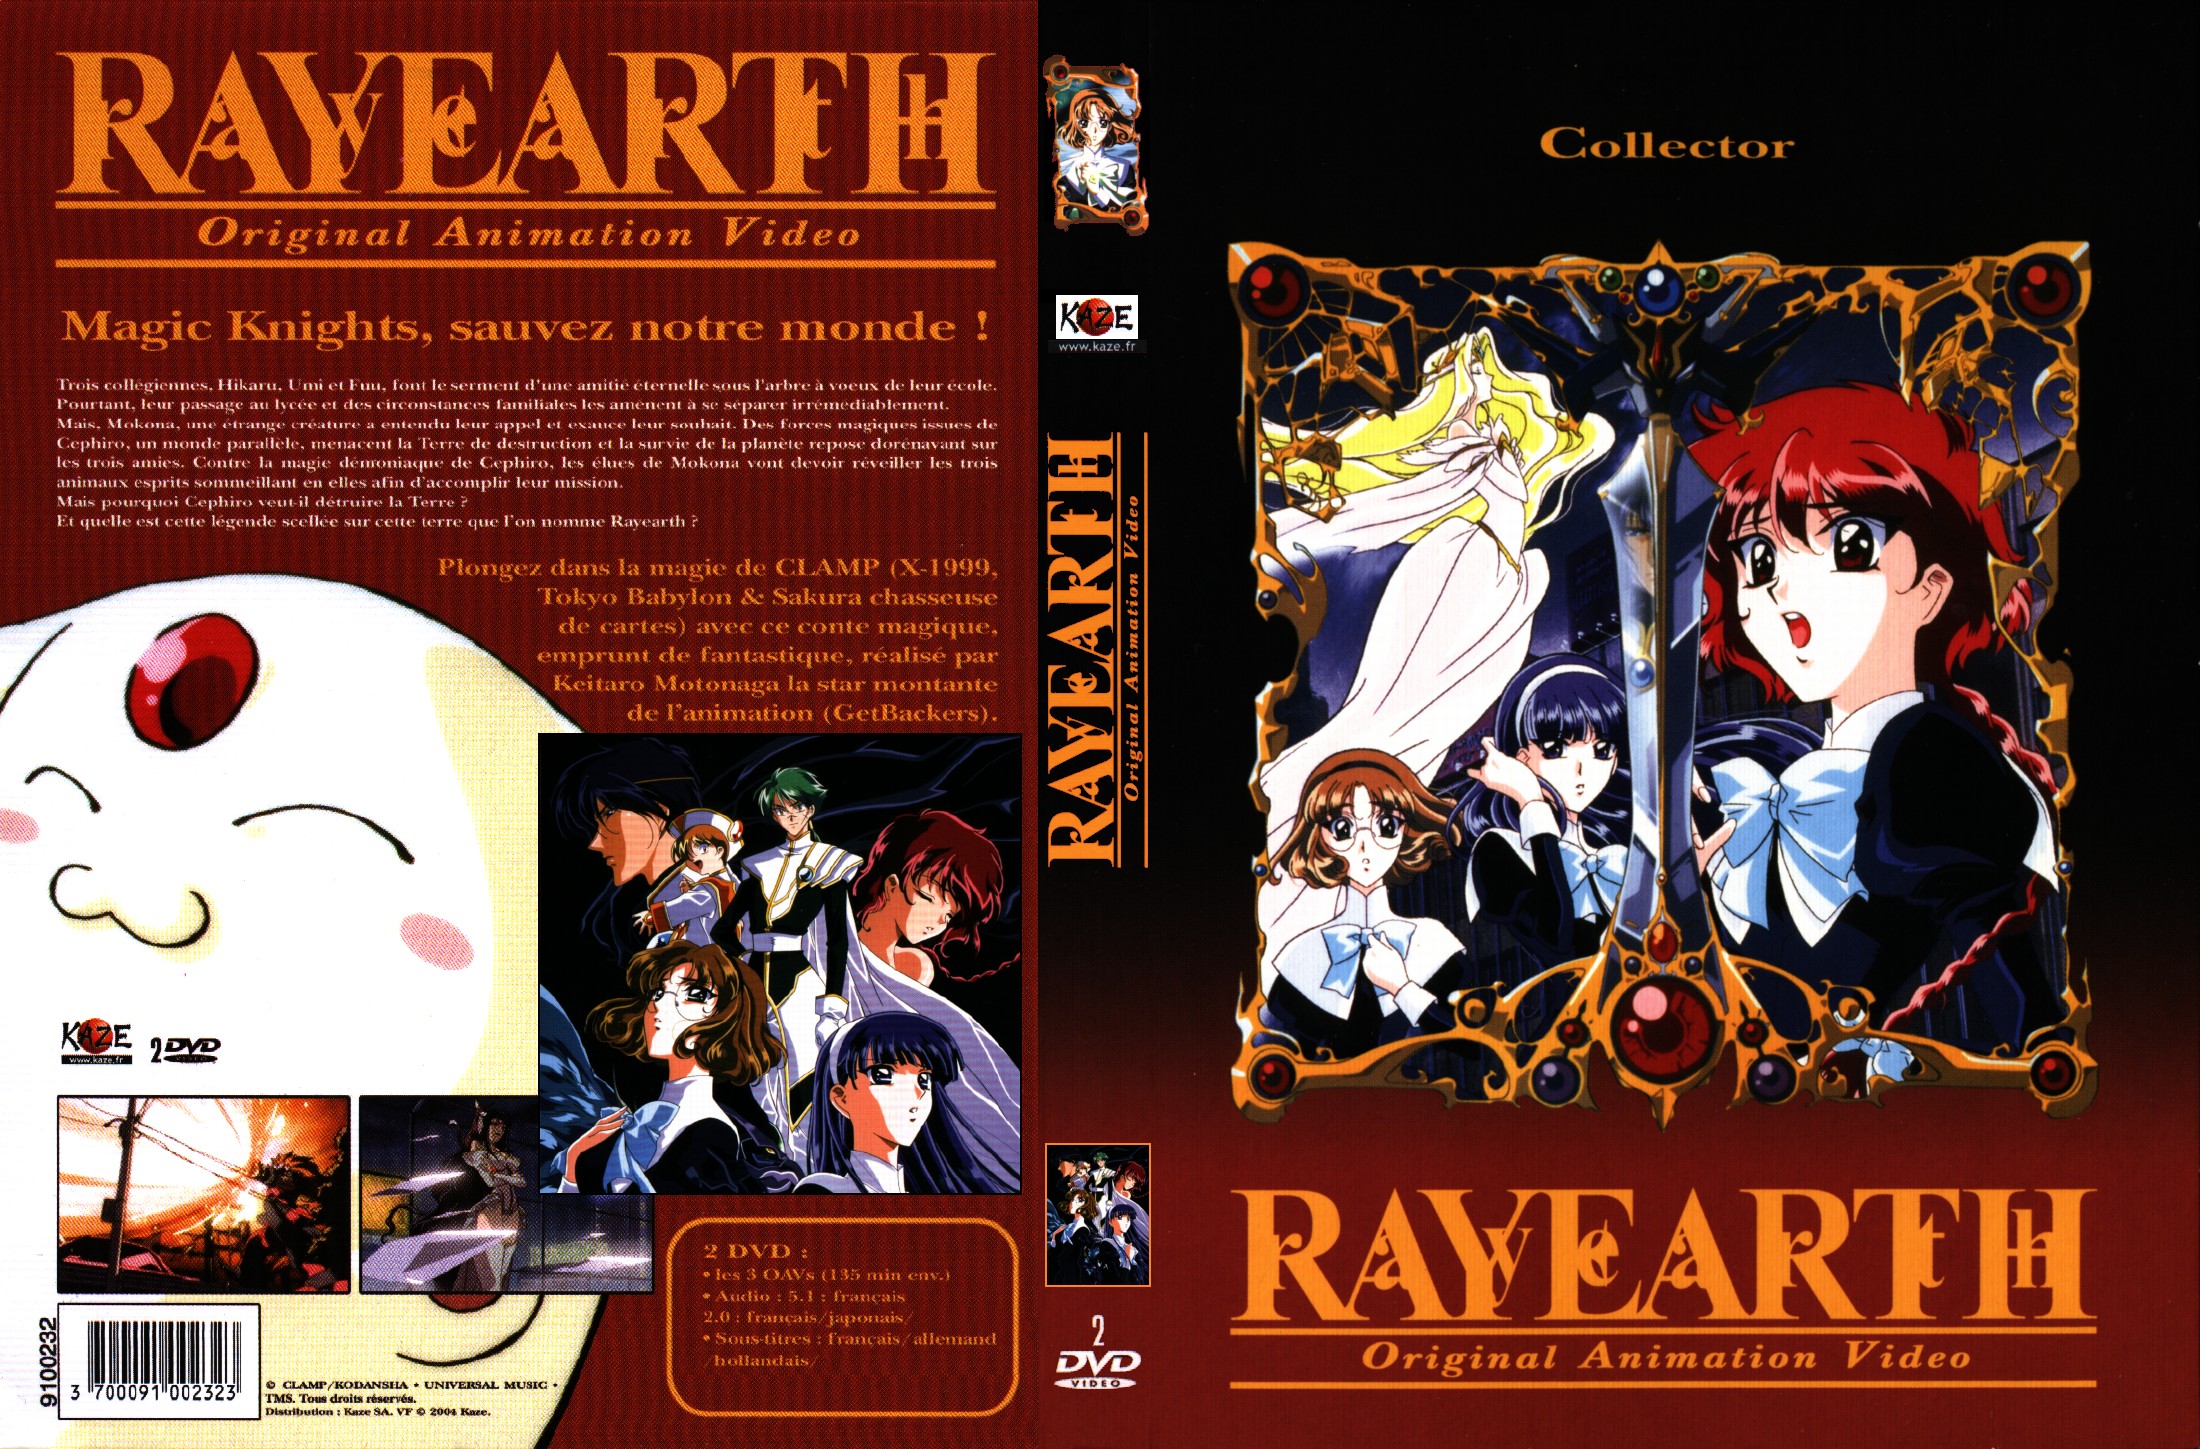 Jaquette DVD Rayearth oav